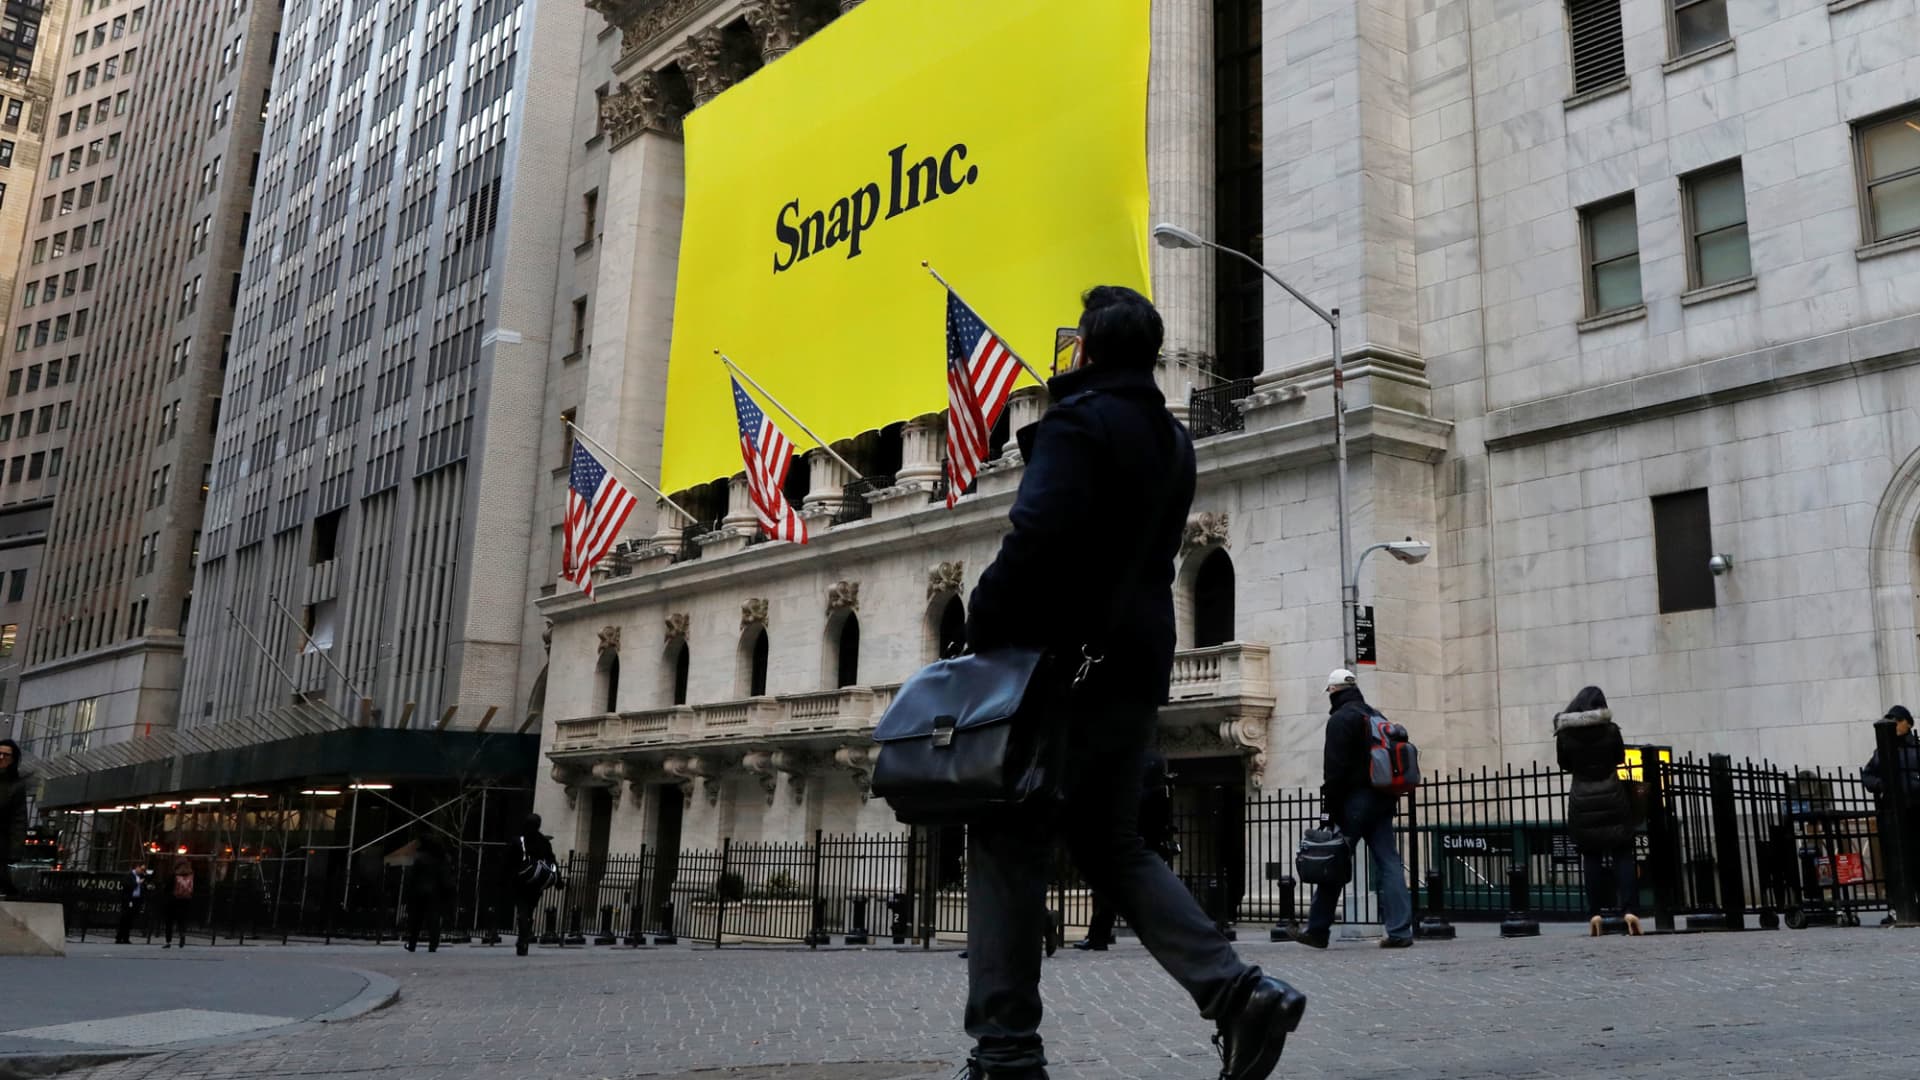 Stocks making the biggest moves midday: Snap, Abercrombie & Fitch, Roblox and more